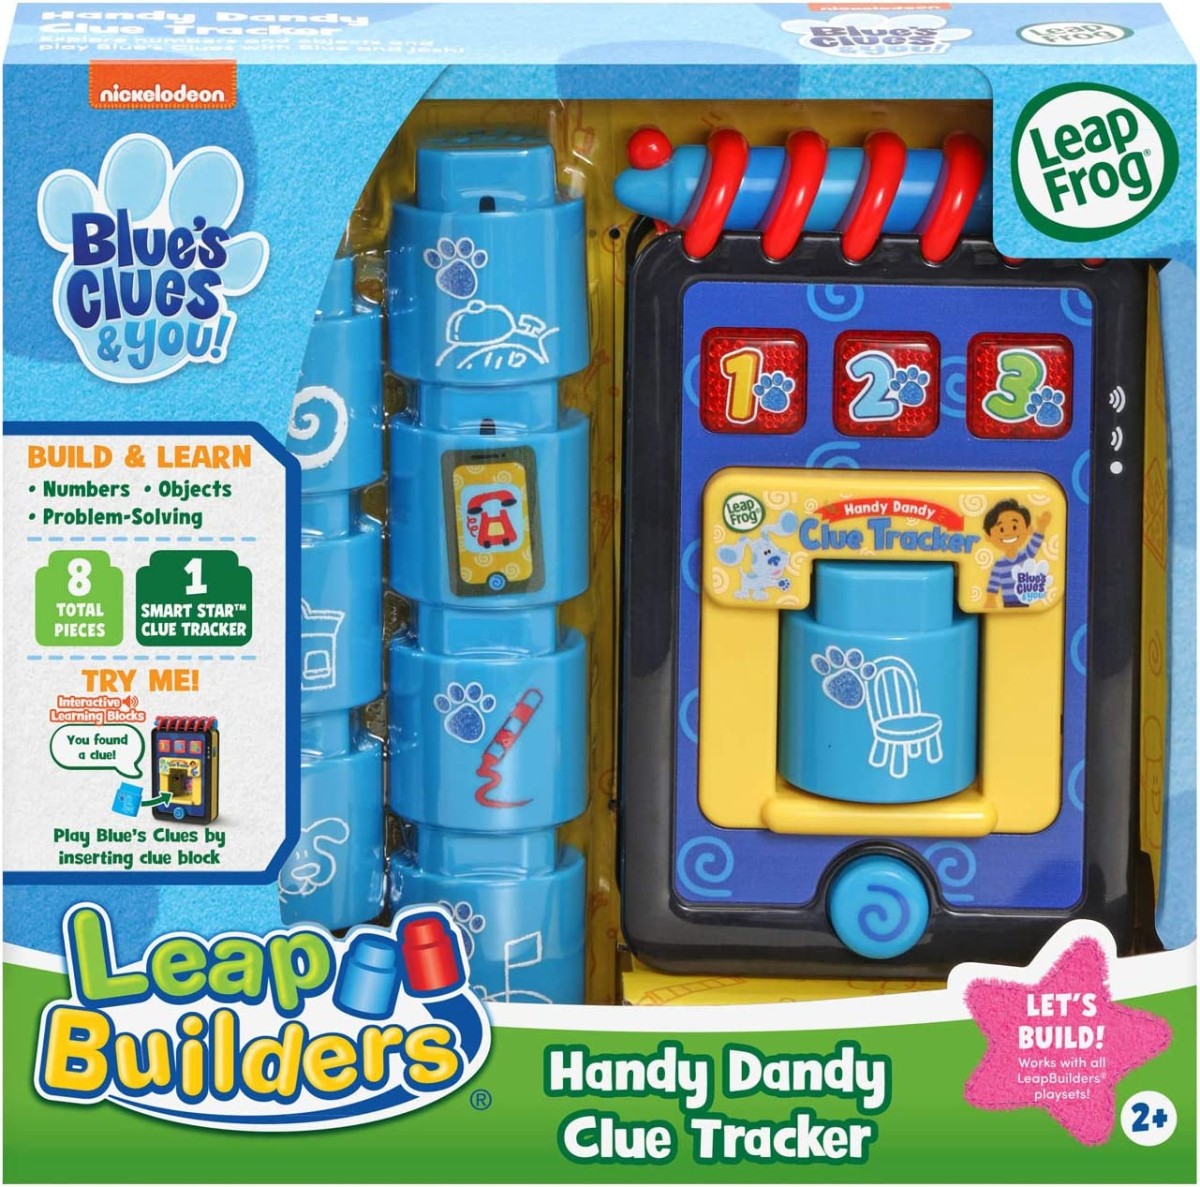 Alea's Deals 68% Off LeapFrog Blue's Clues and You! Handy Dandy Clue Tracker! Was $17.99!  